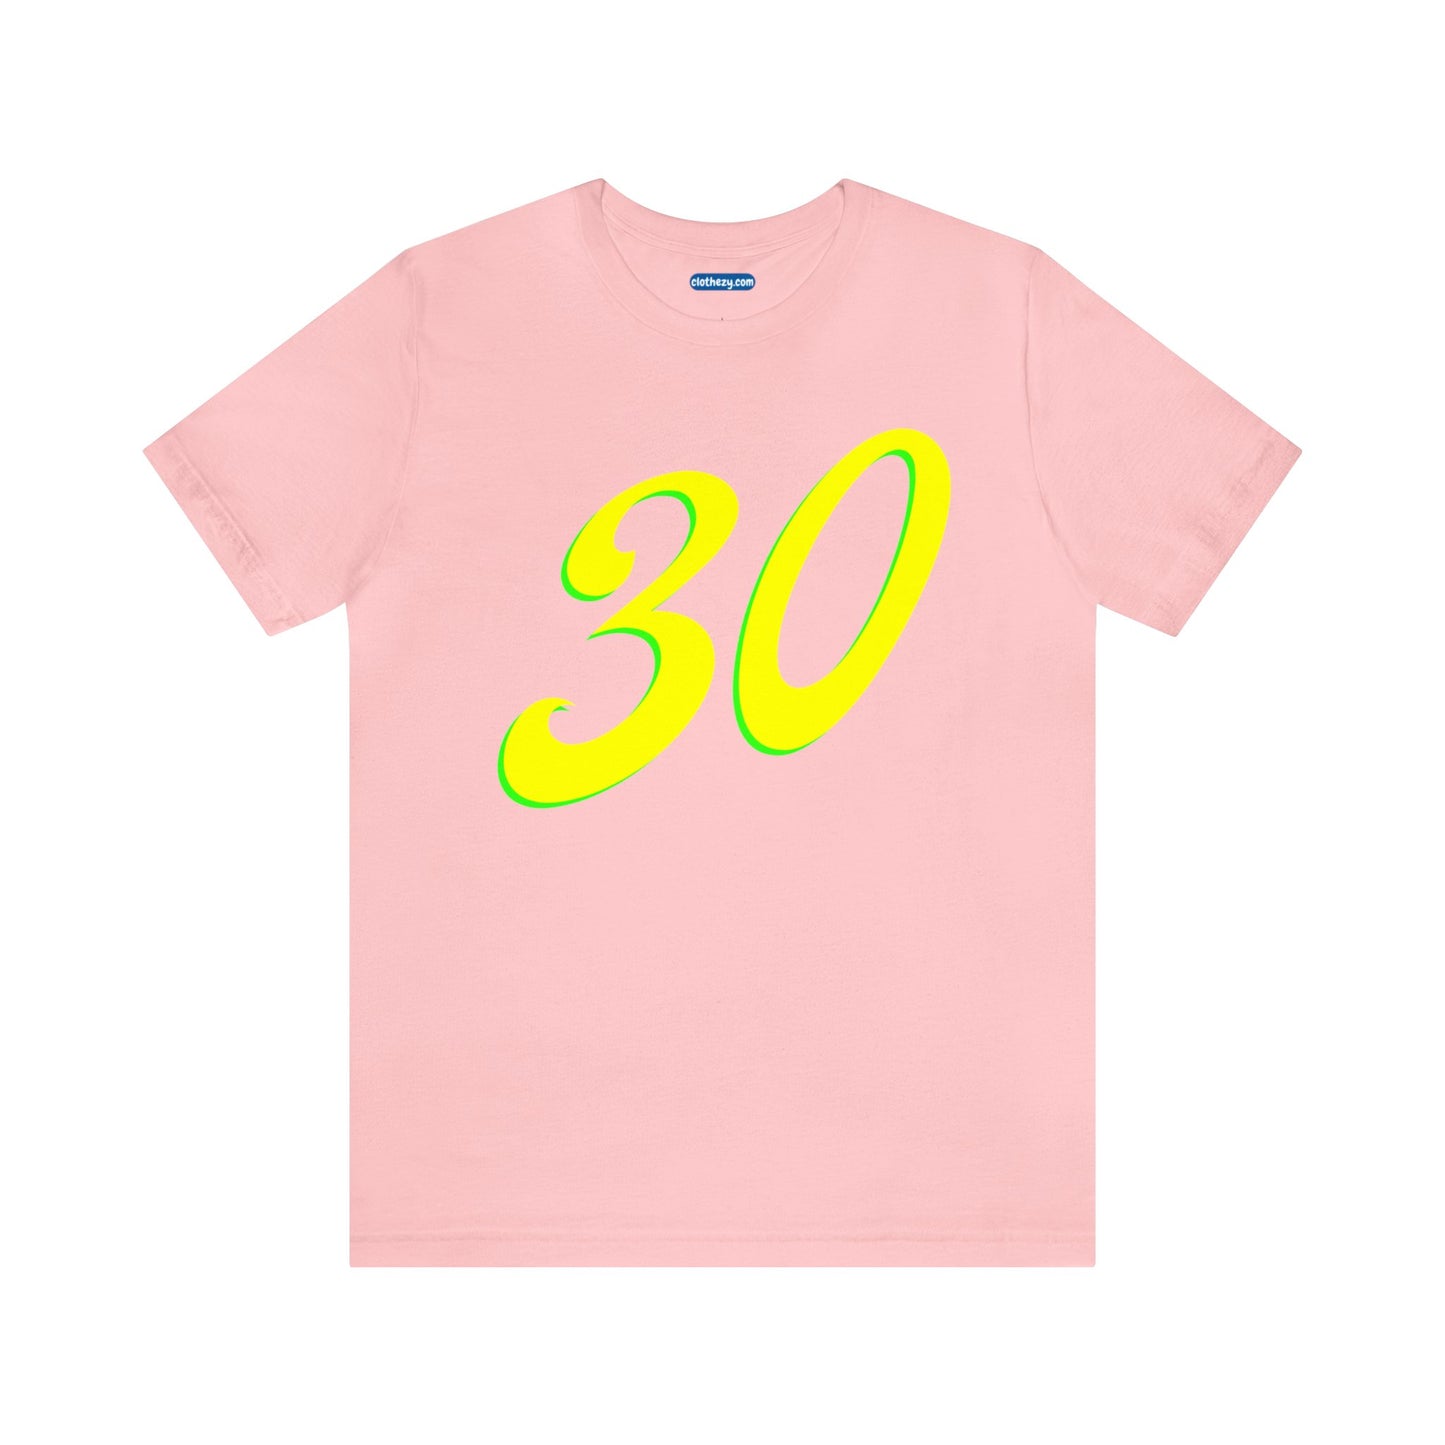 Number 30 Design - Soft Cotton Tee for birthdays and celebrations, Gift for friends and family, Multiple Options by clothezy.com in Pink Size Small - Buy Now